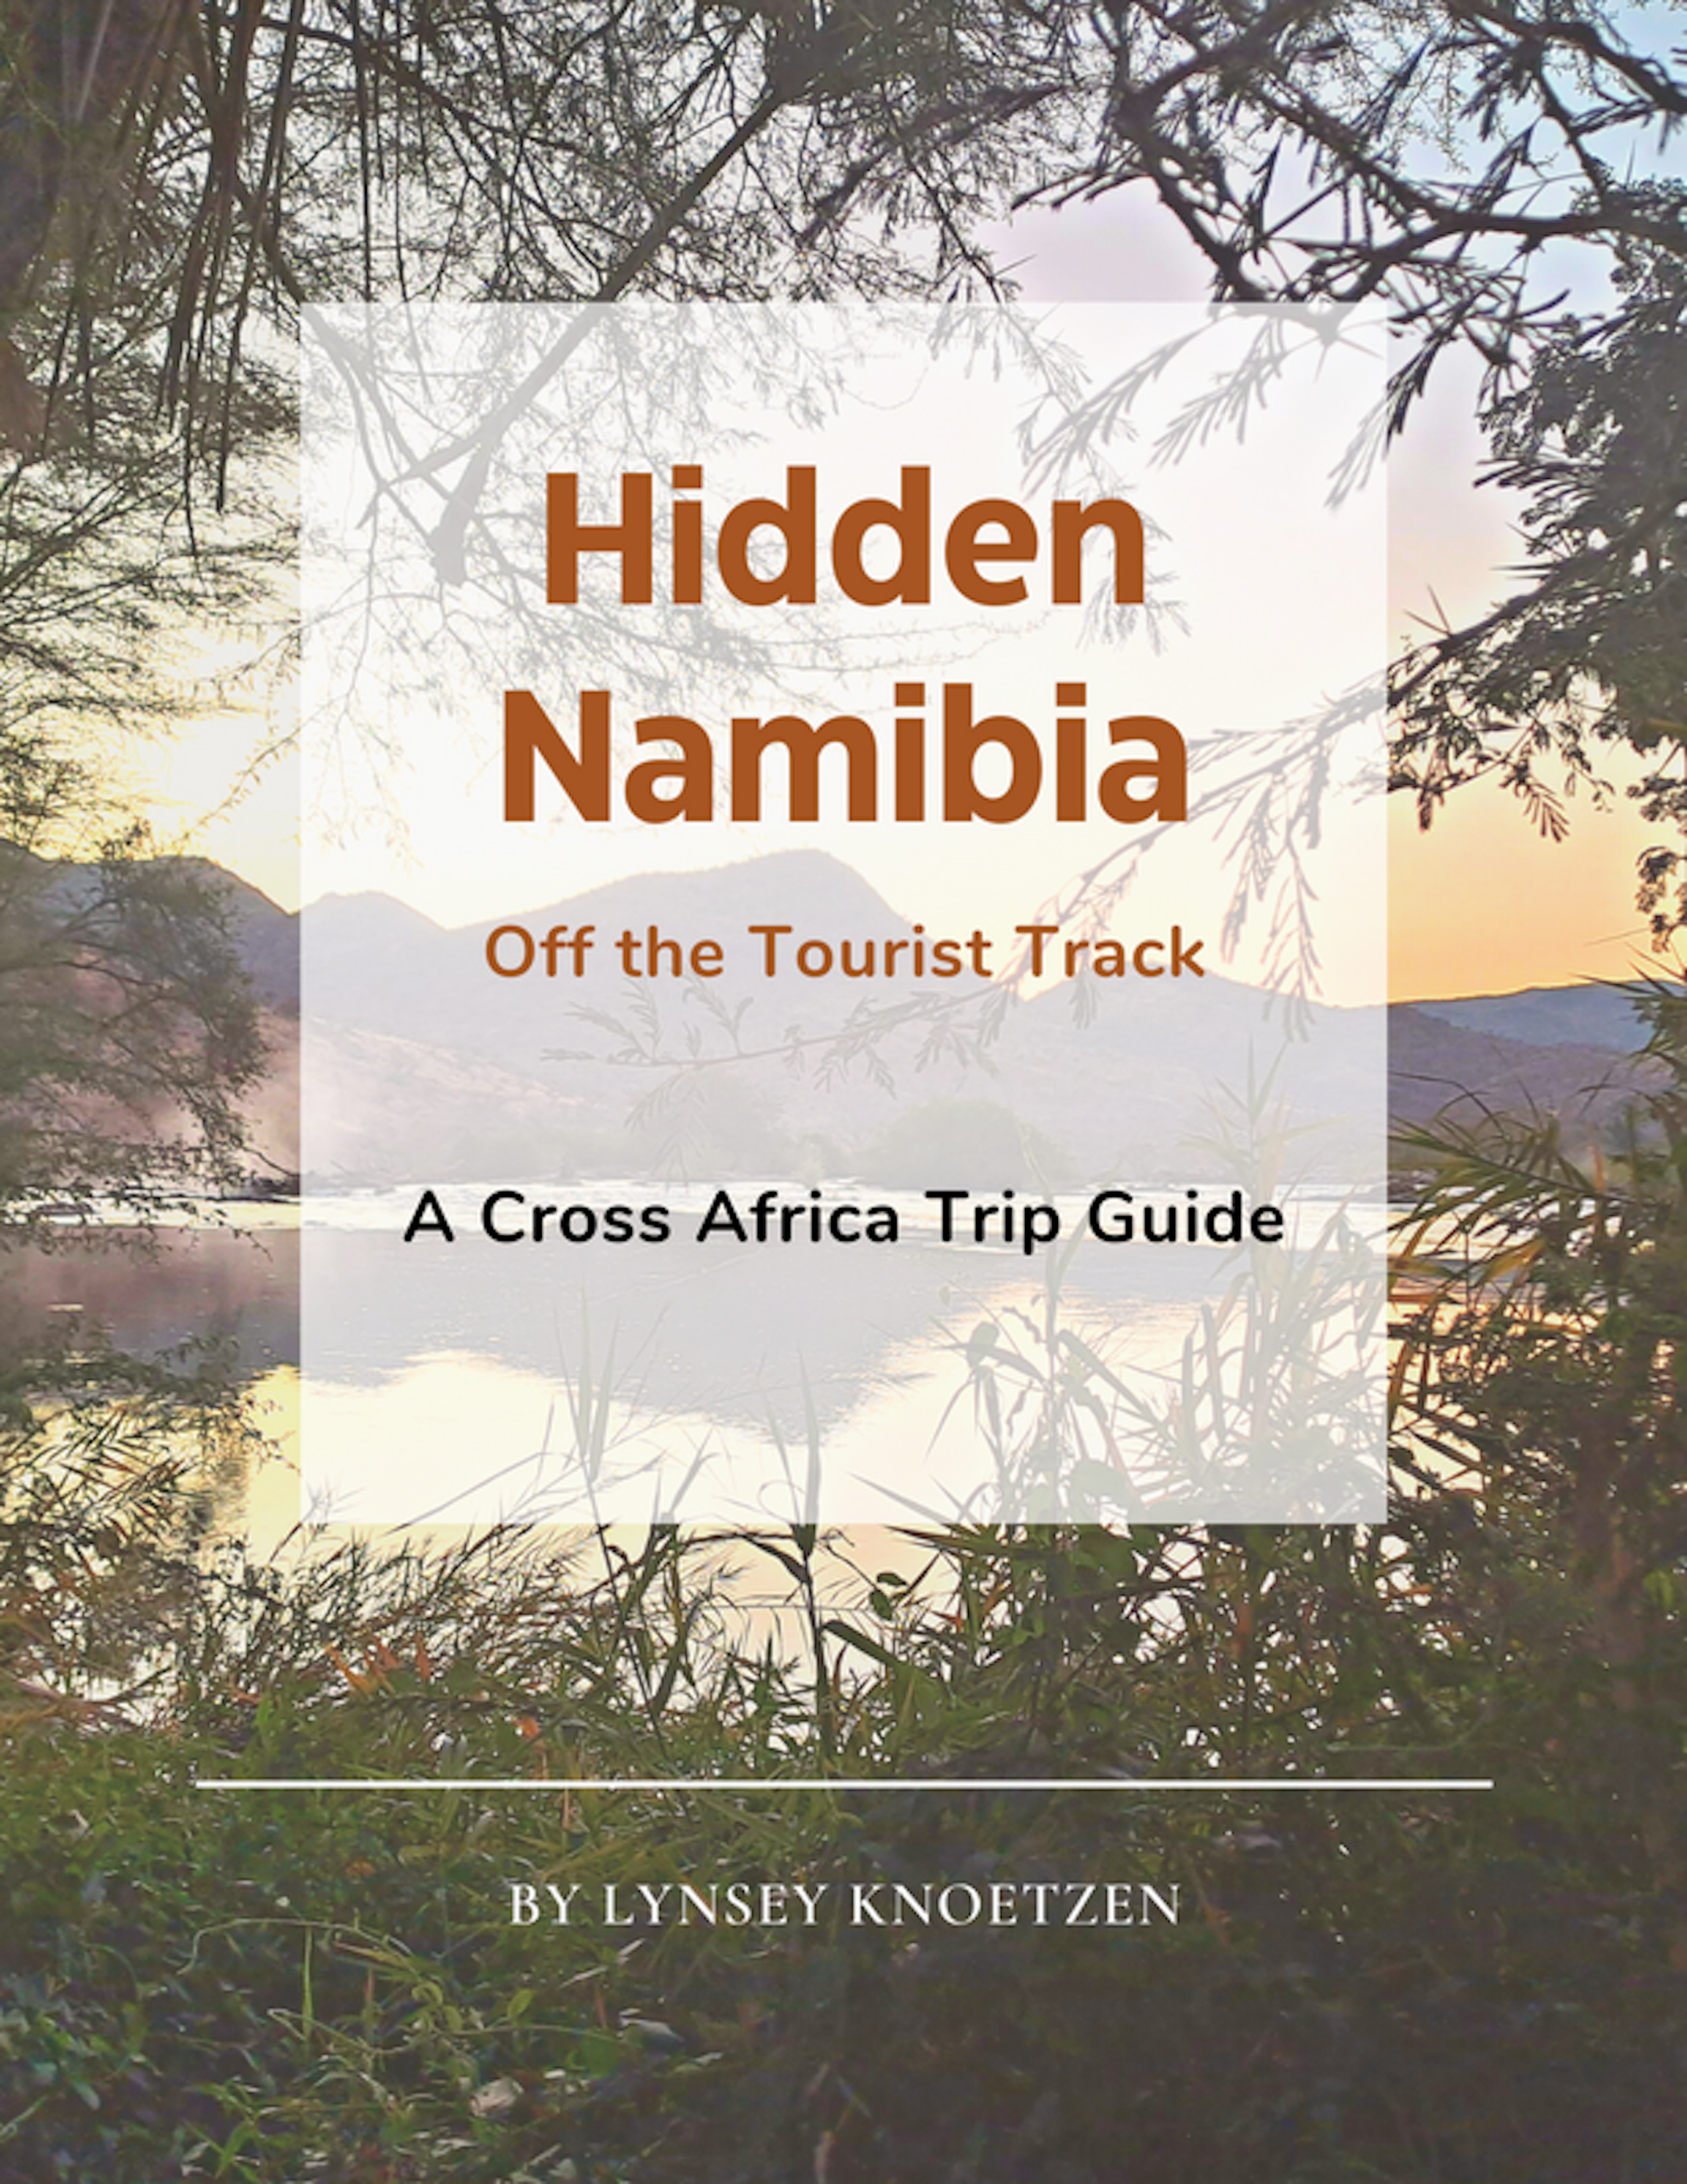 Hidden Namibia: Off the Tourist Track